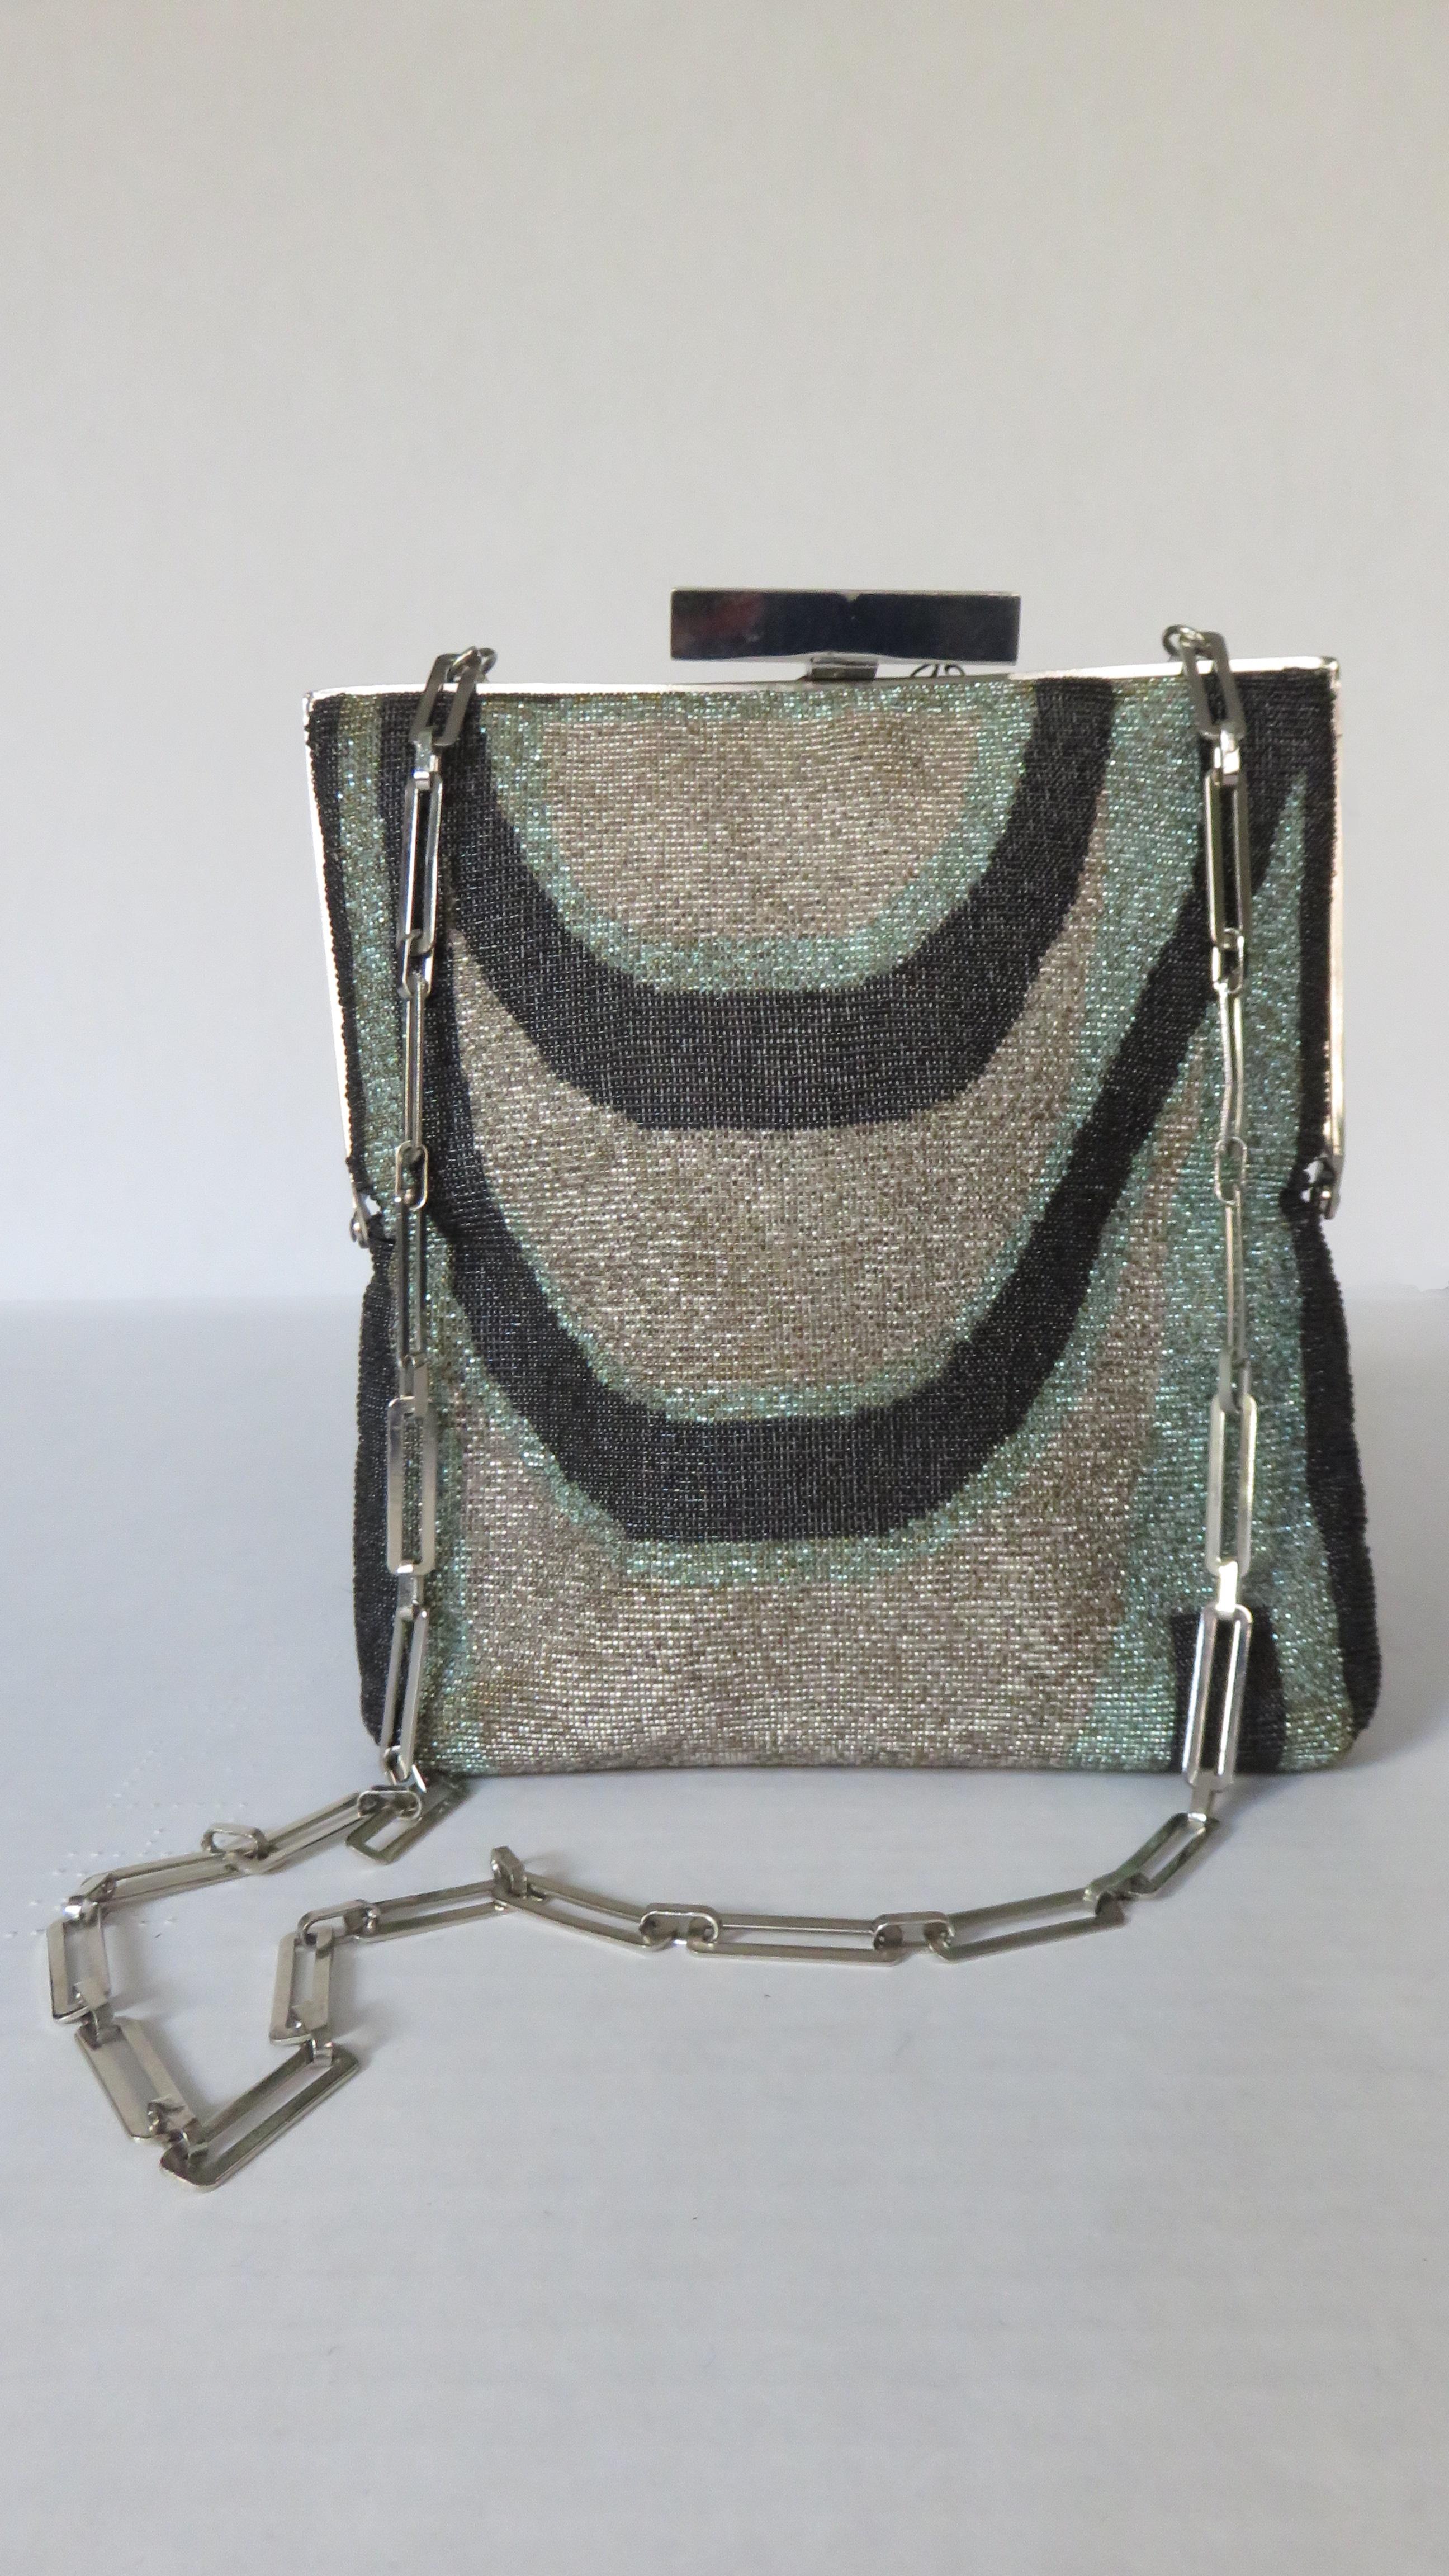 A fabulous Pierre Cardin shoulder bag in black, silver and mint green micro beading.  It has a silver rectangular link chain strap, frame, and rectangular PC engraved top clasp closure.  Each side has a unique abstract pattern.  

Height  7